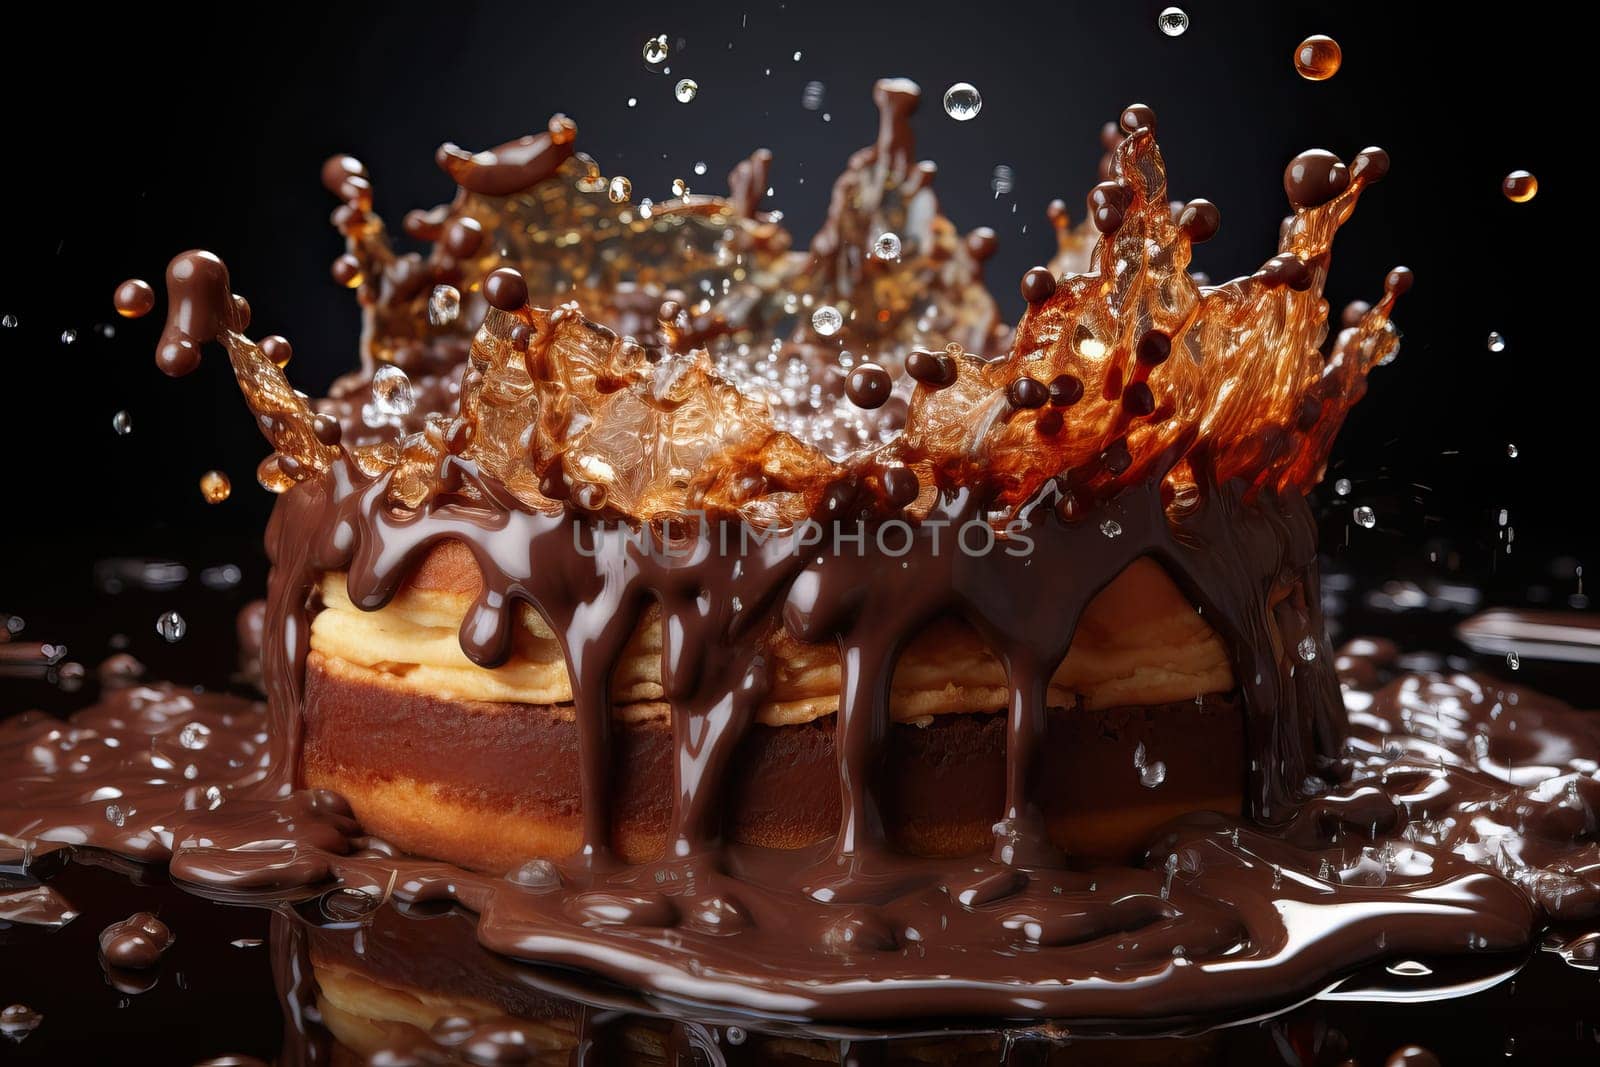 Splash of chocolate on donuts in the shape of a crown on a black background by Niko_Cingaryuk